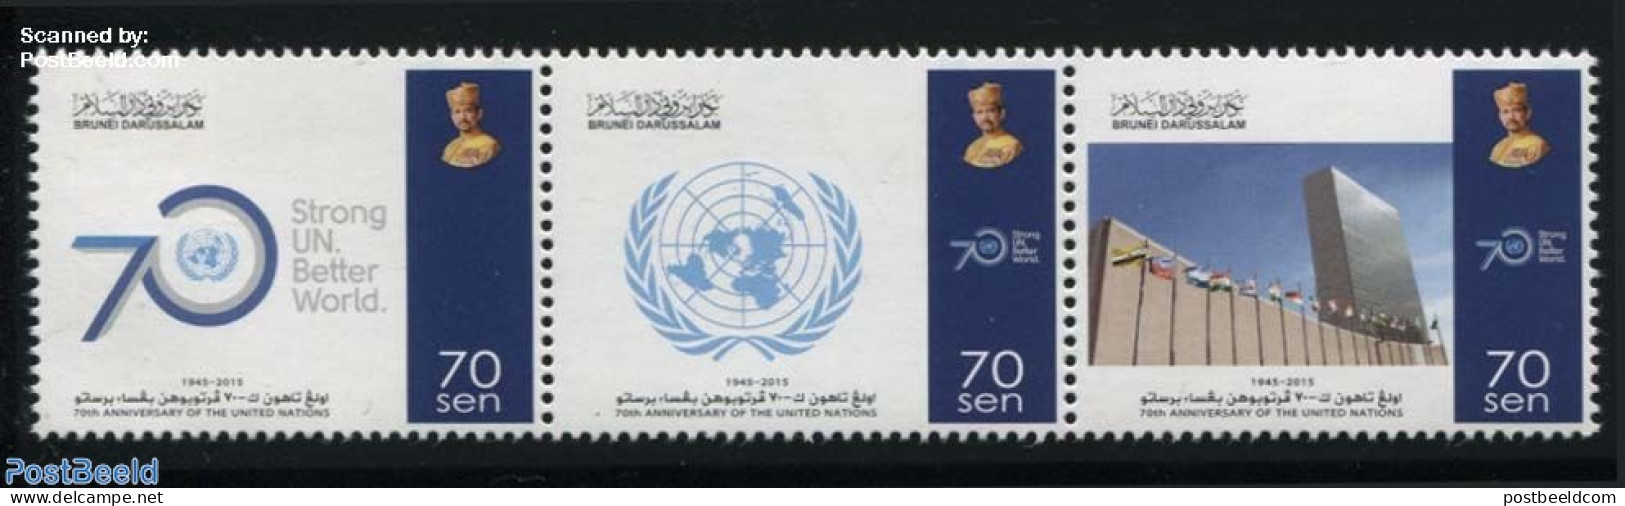 Brunei 2015 70 Years United Nations 3v [::], Mint NH, History - Flags - United Nations - Brunei (1984-...)